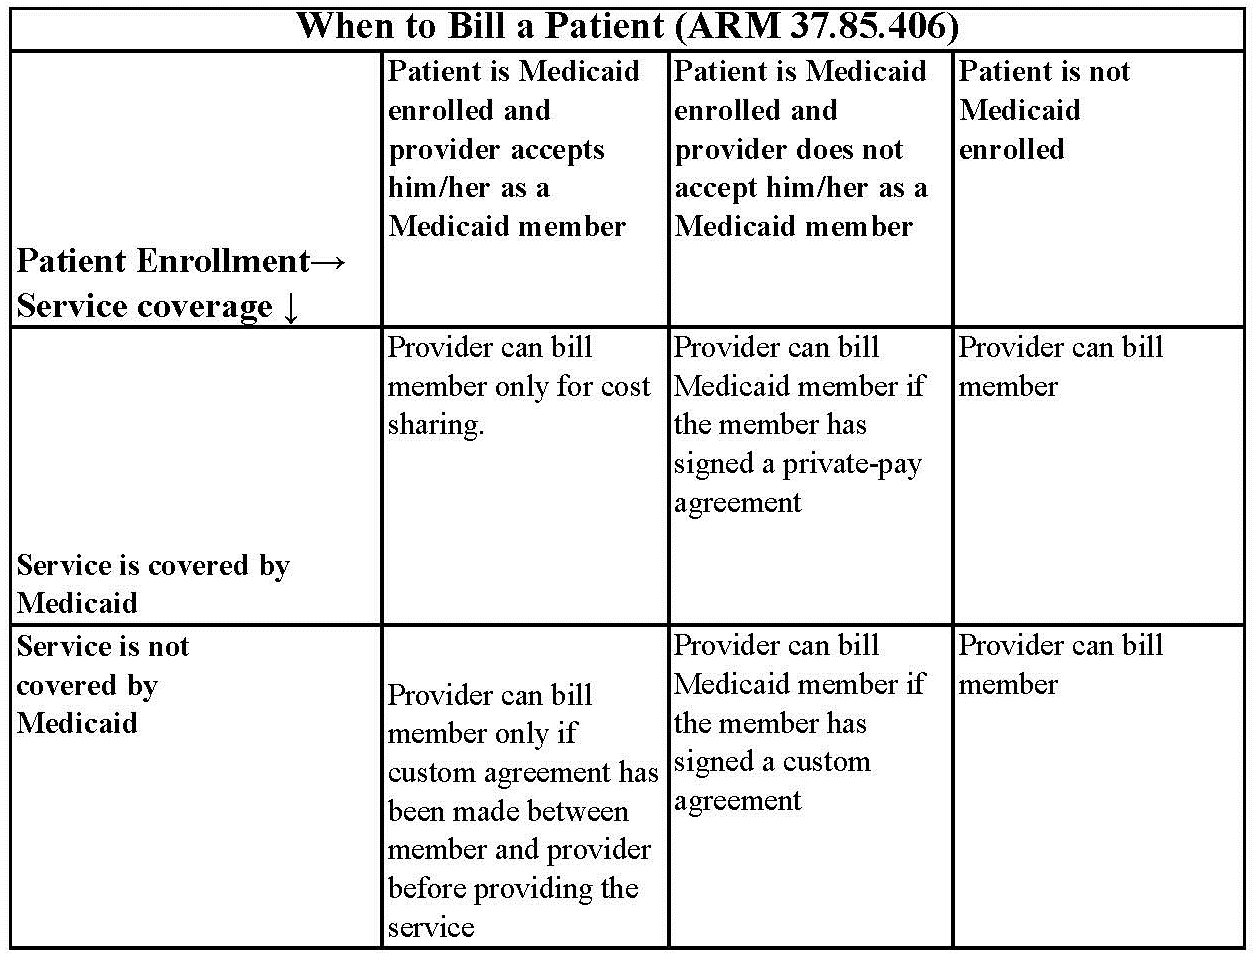 When to bill a medicaid client